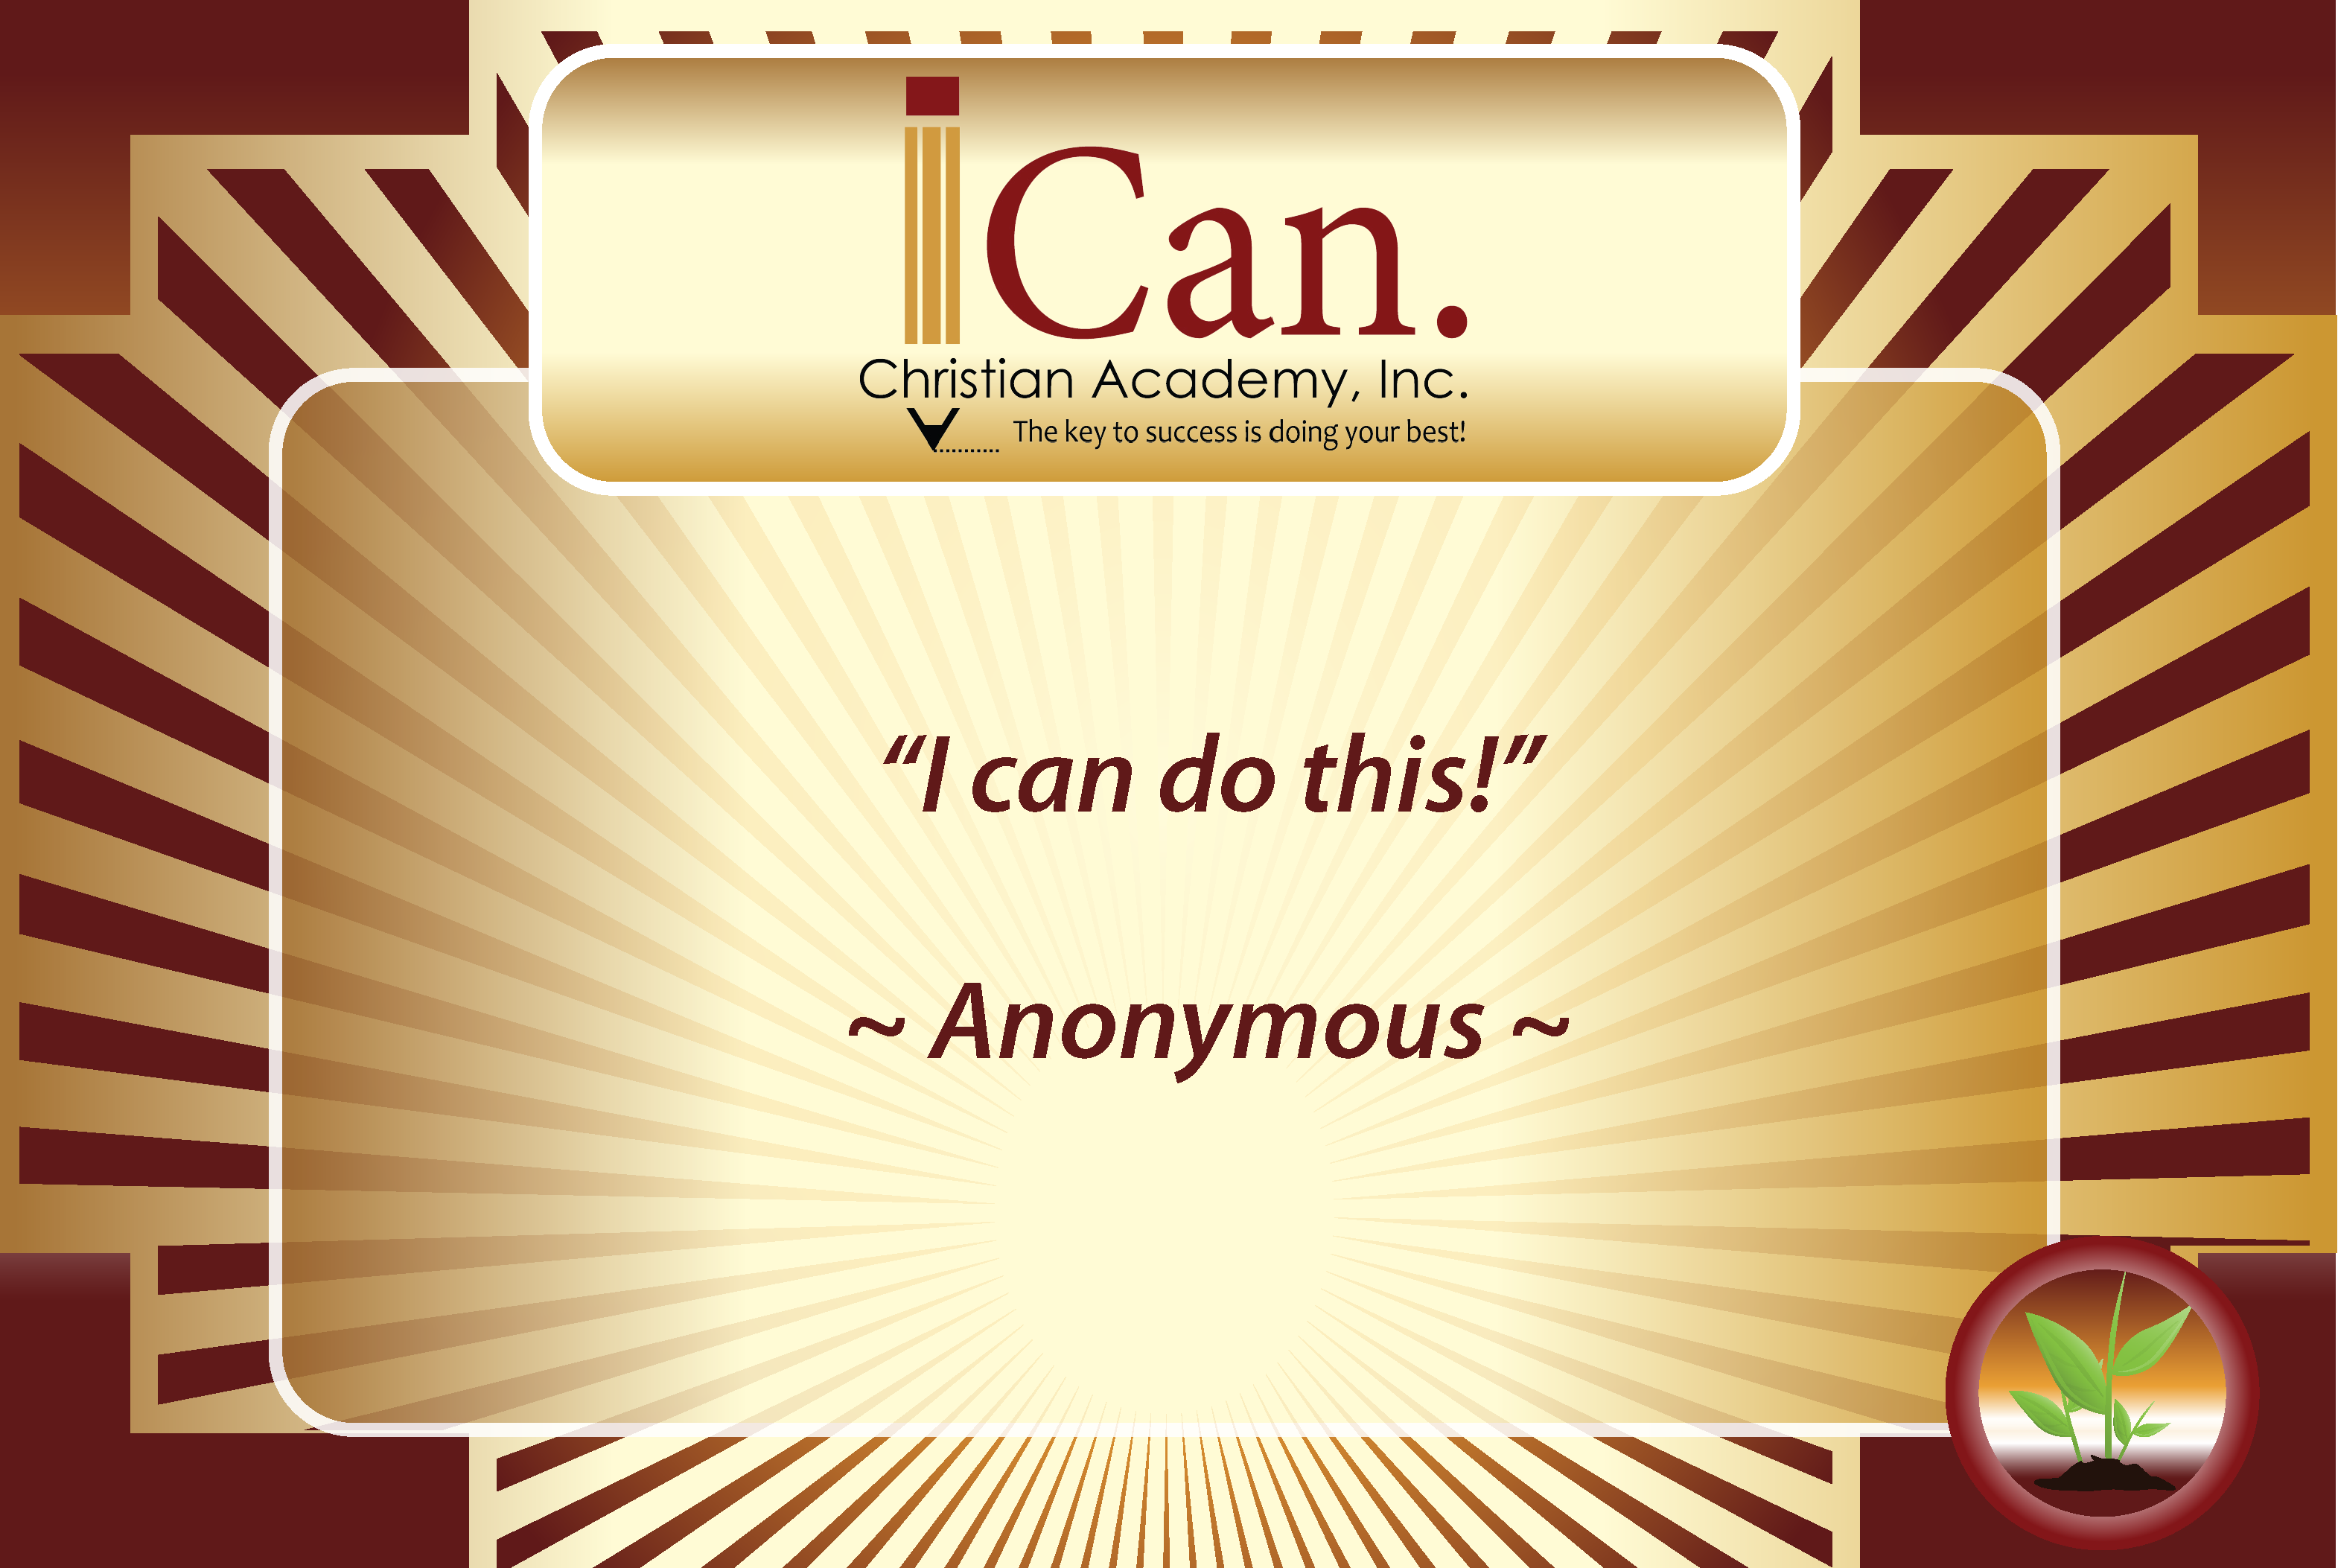 YES I CAN!